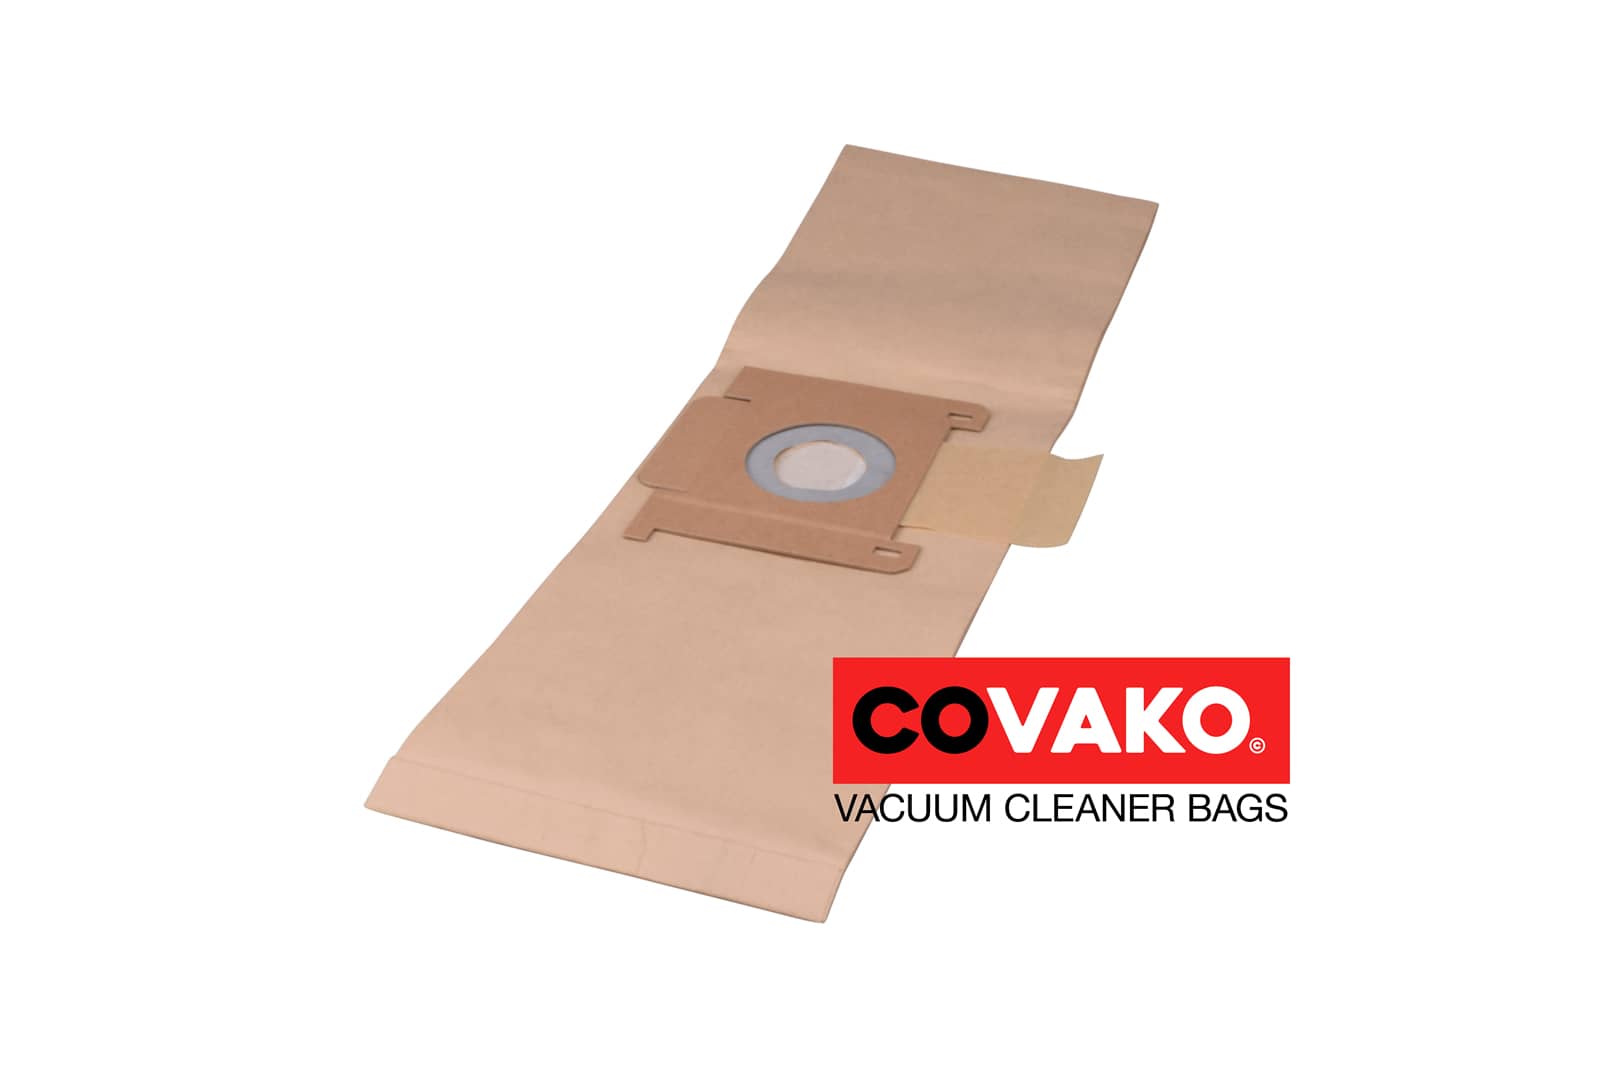 Oehme Otto Steady Extra 6.0 / Paper - Oehme Otto vacuum cleaner bags